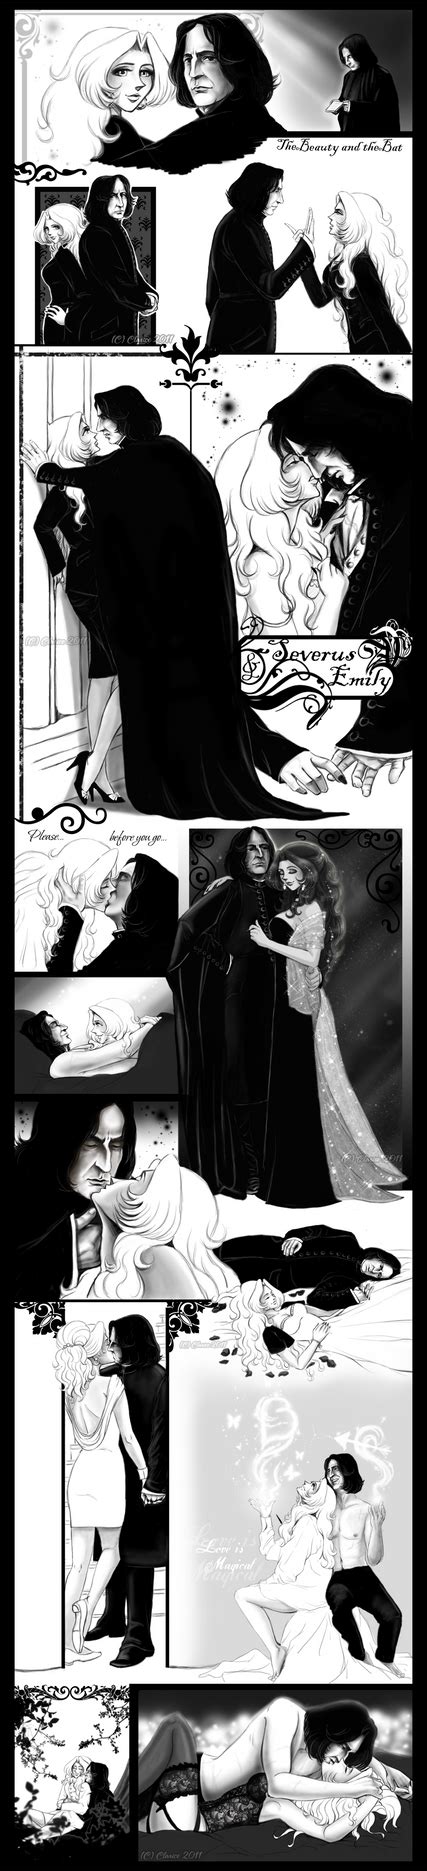 severus snape and emily brown by redpassion on deviantart